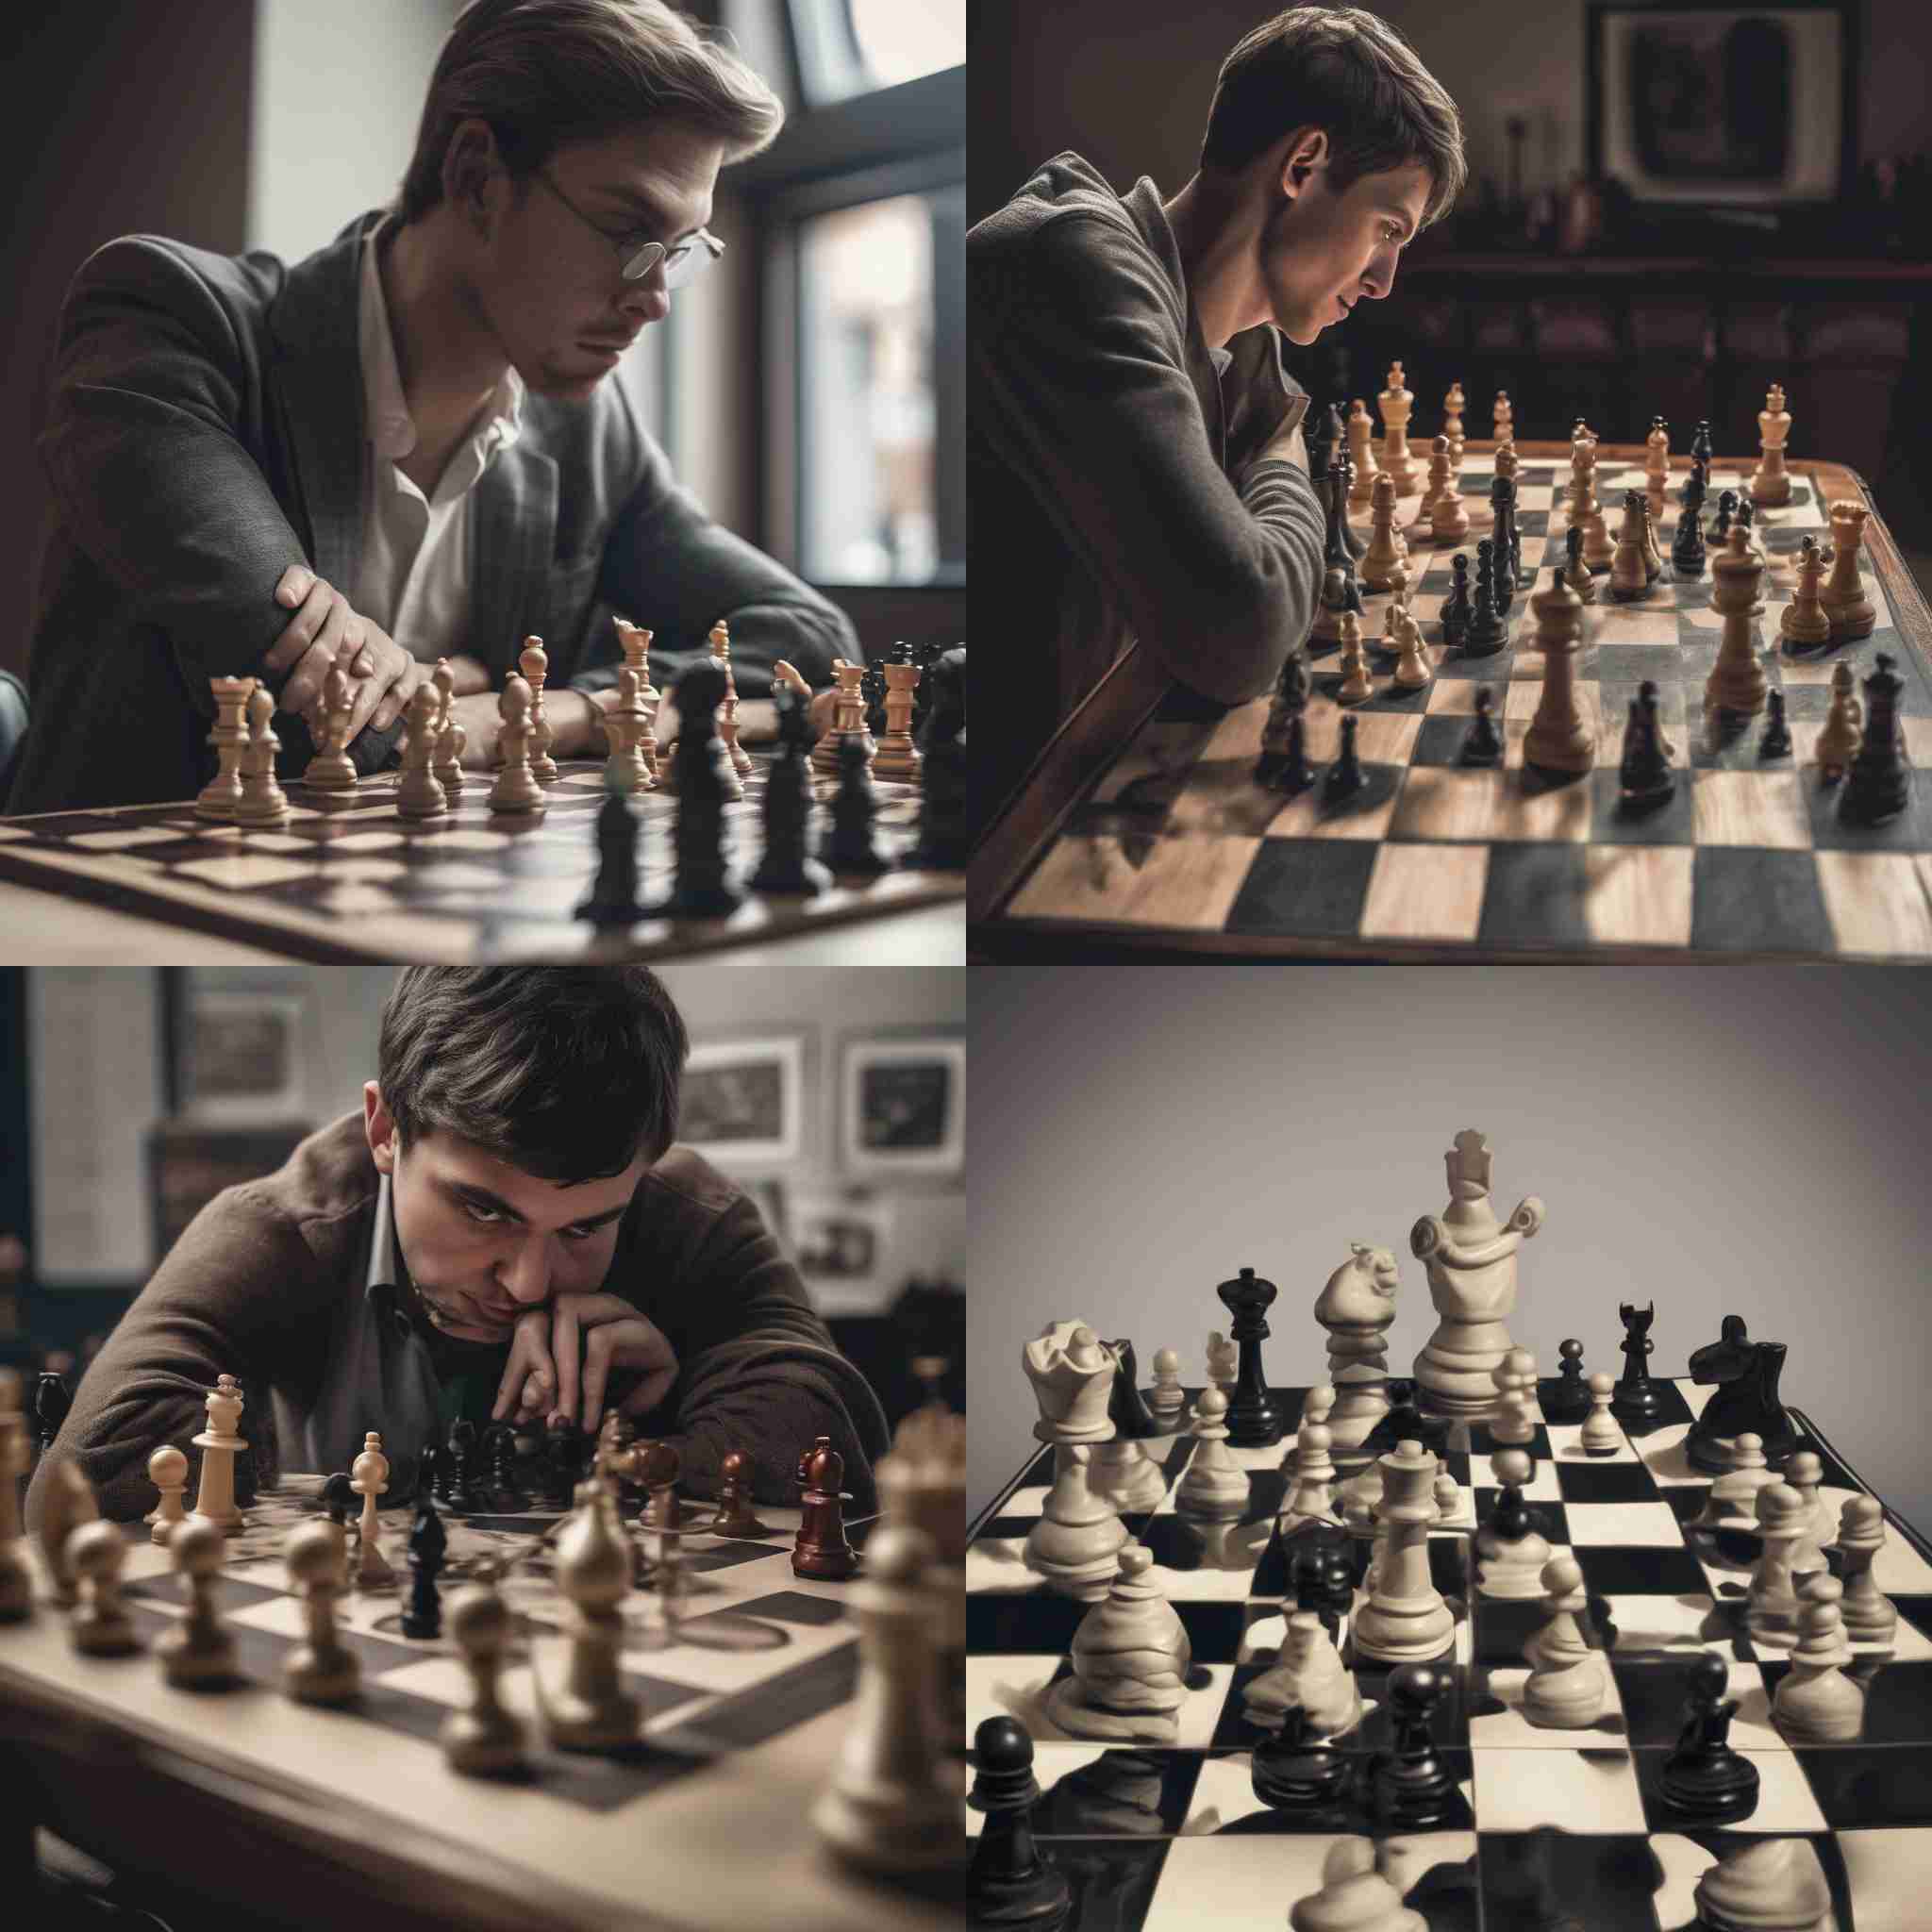 A chess player during the opponent's turn